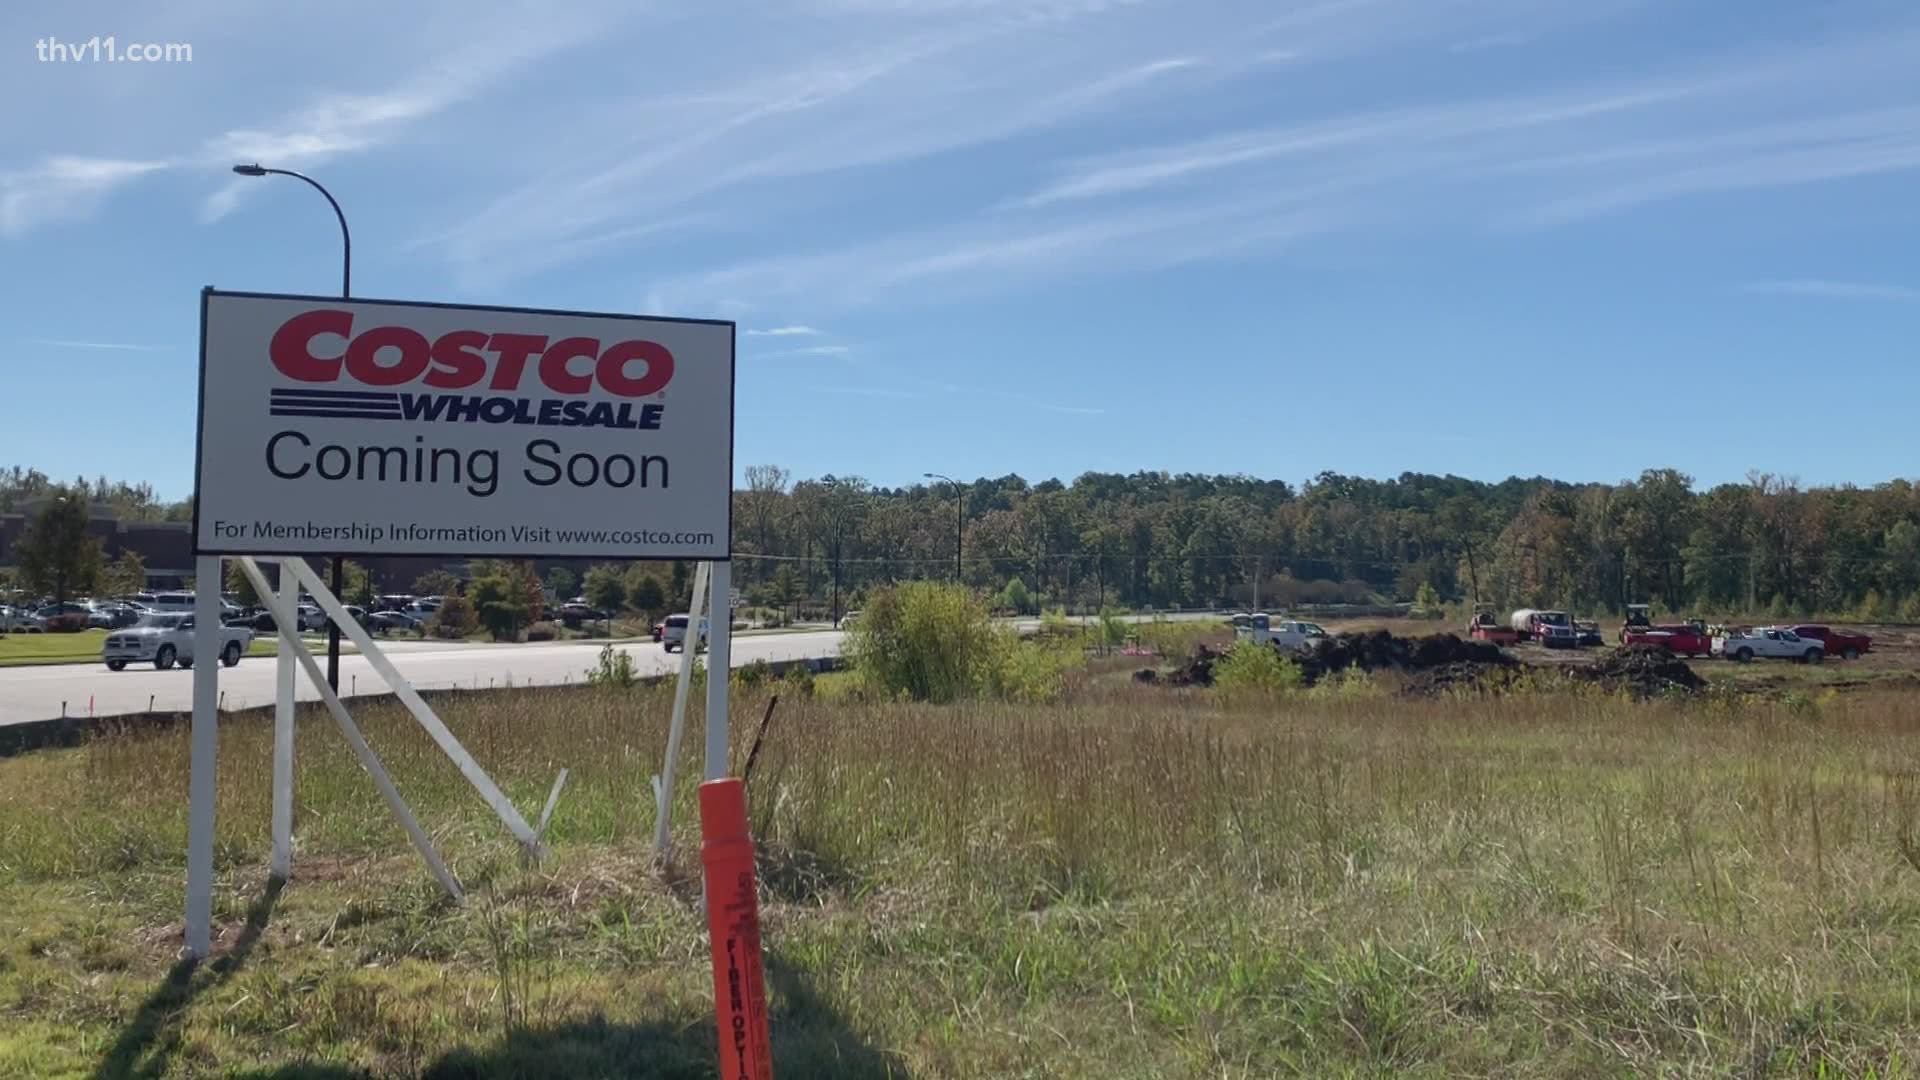 The sign for a new Costco in Little Rock is officially up.